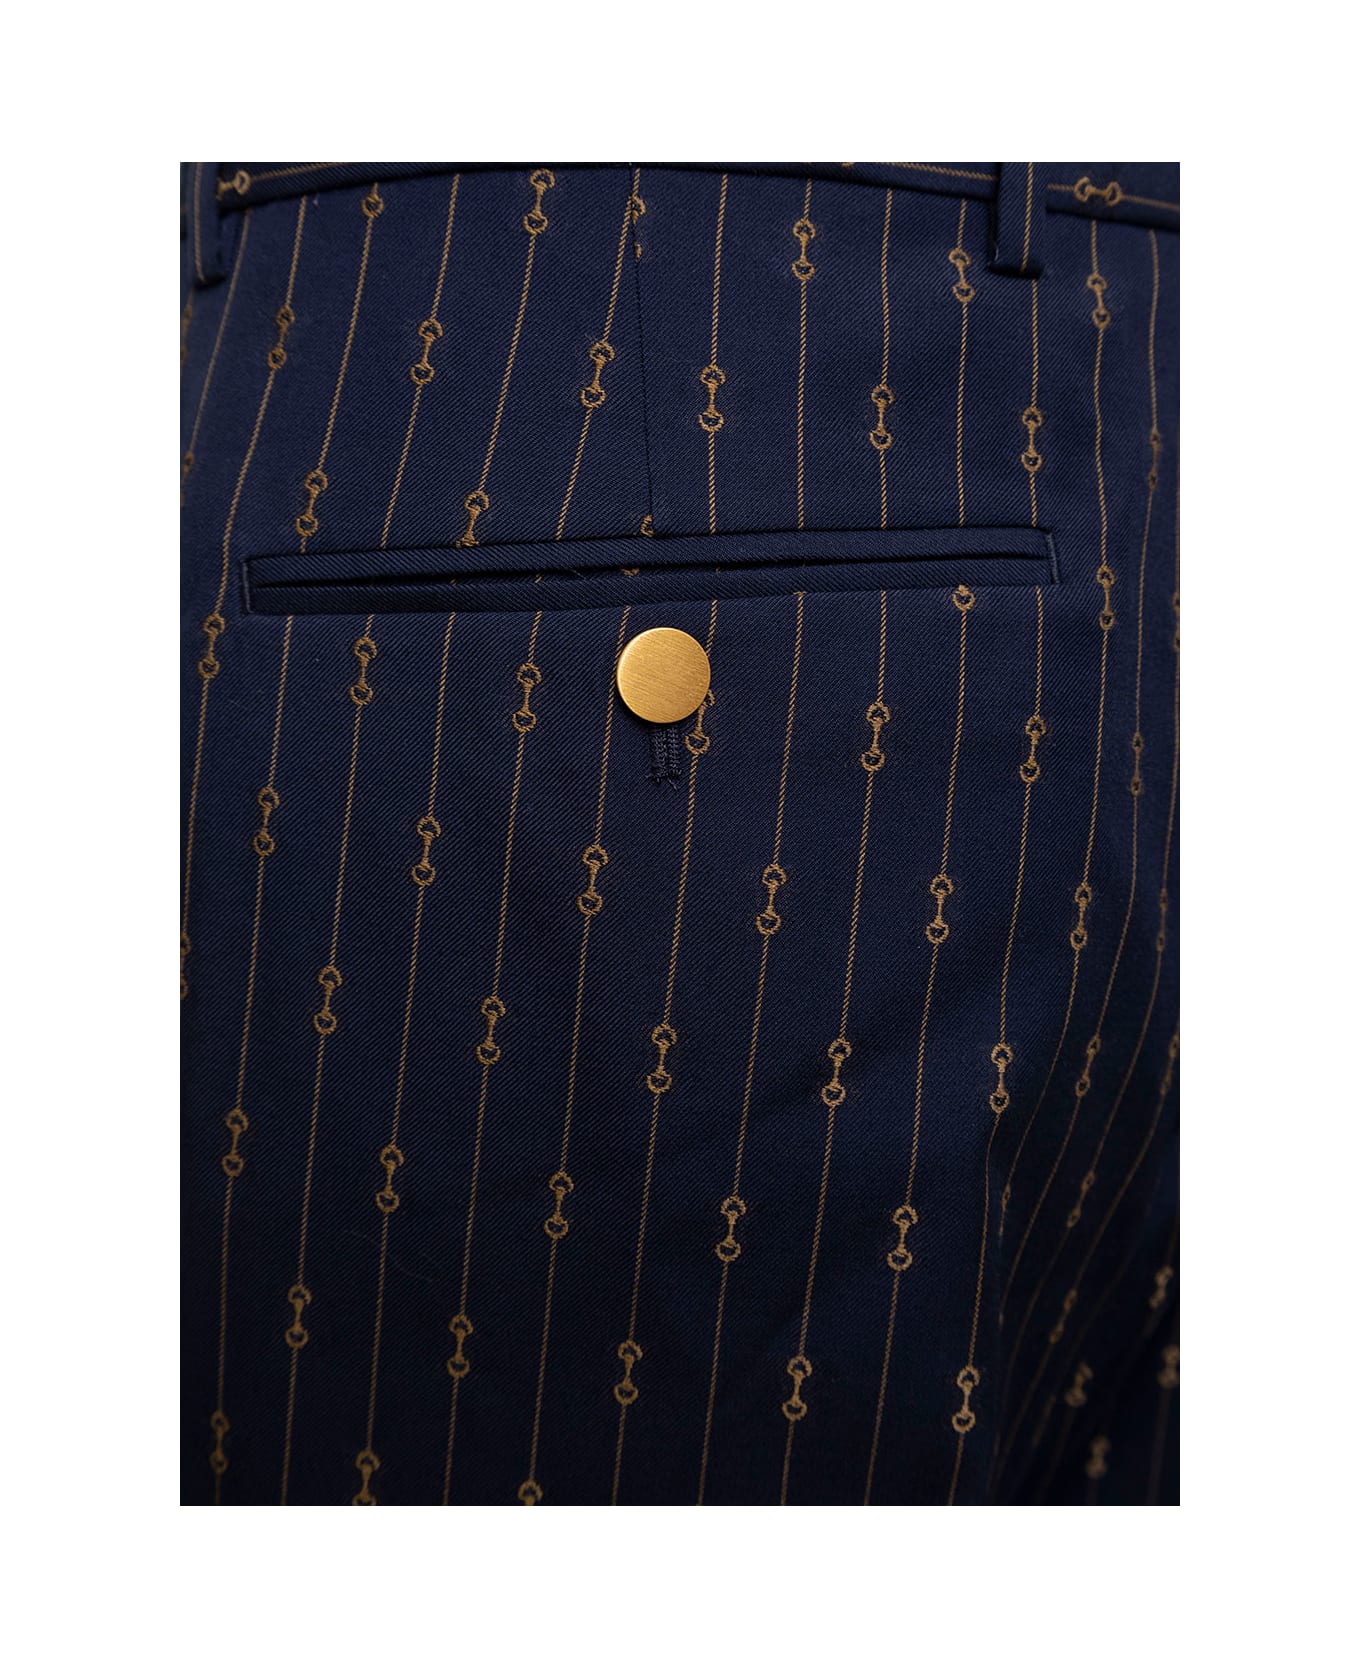 Gucci Man's Blue Wool Tailored Pants With Allover Horsebit Motif - blue